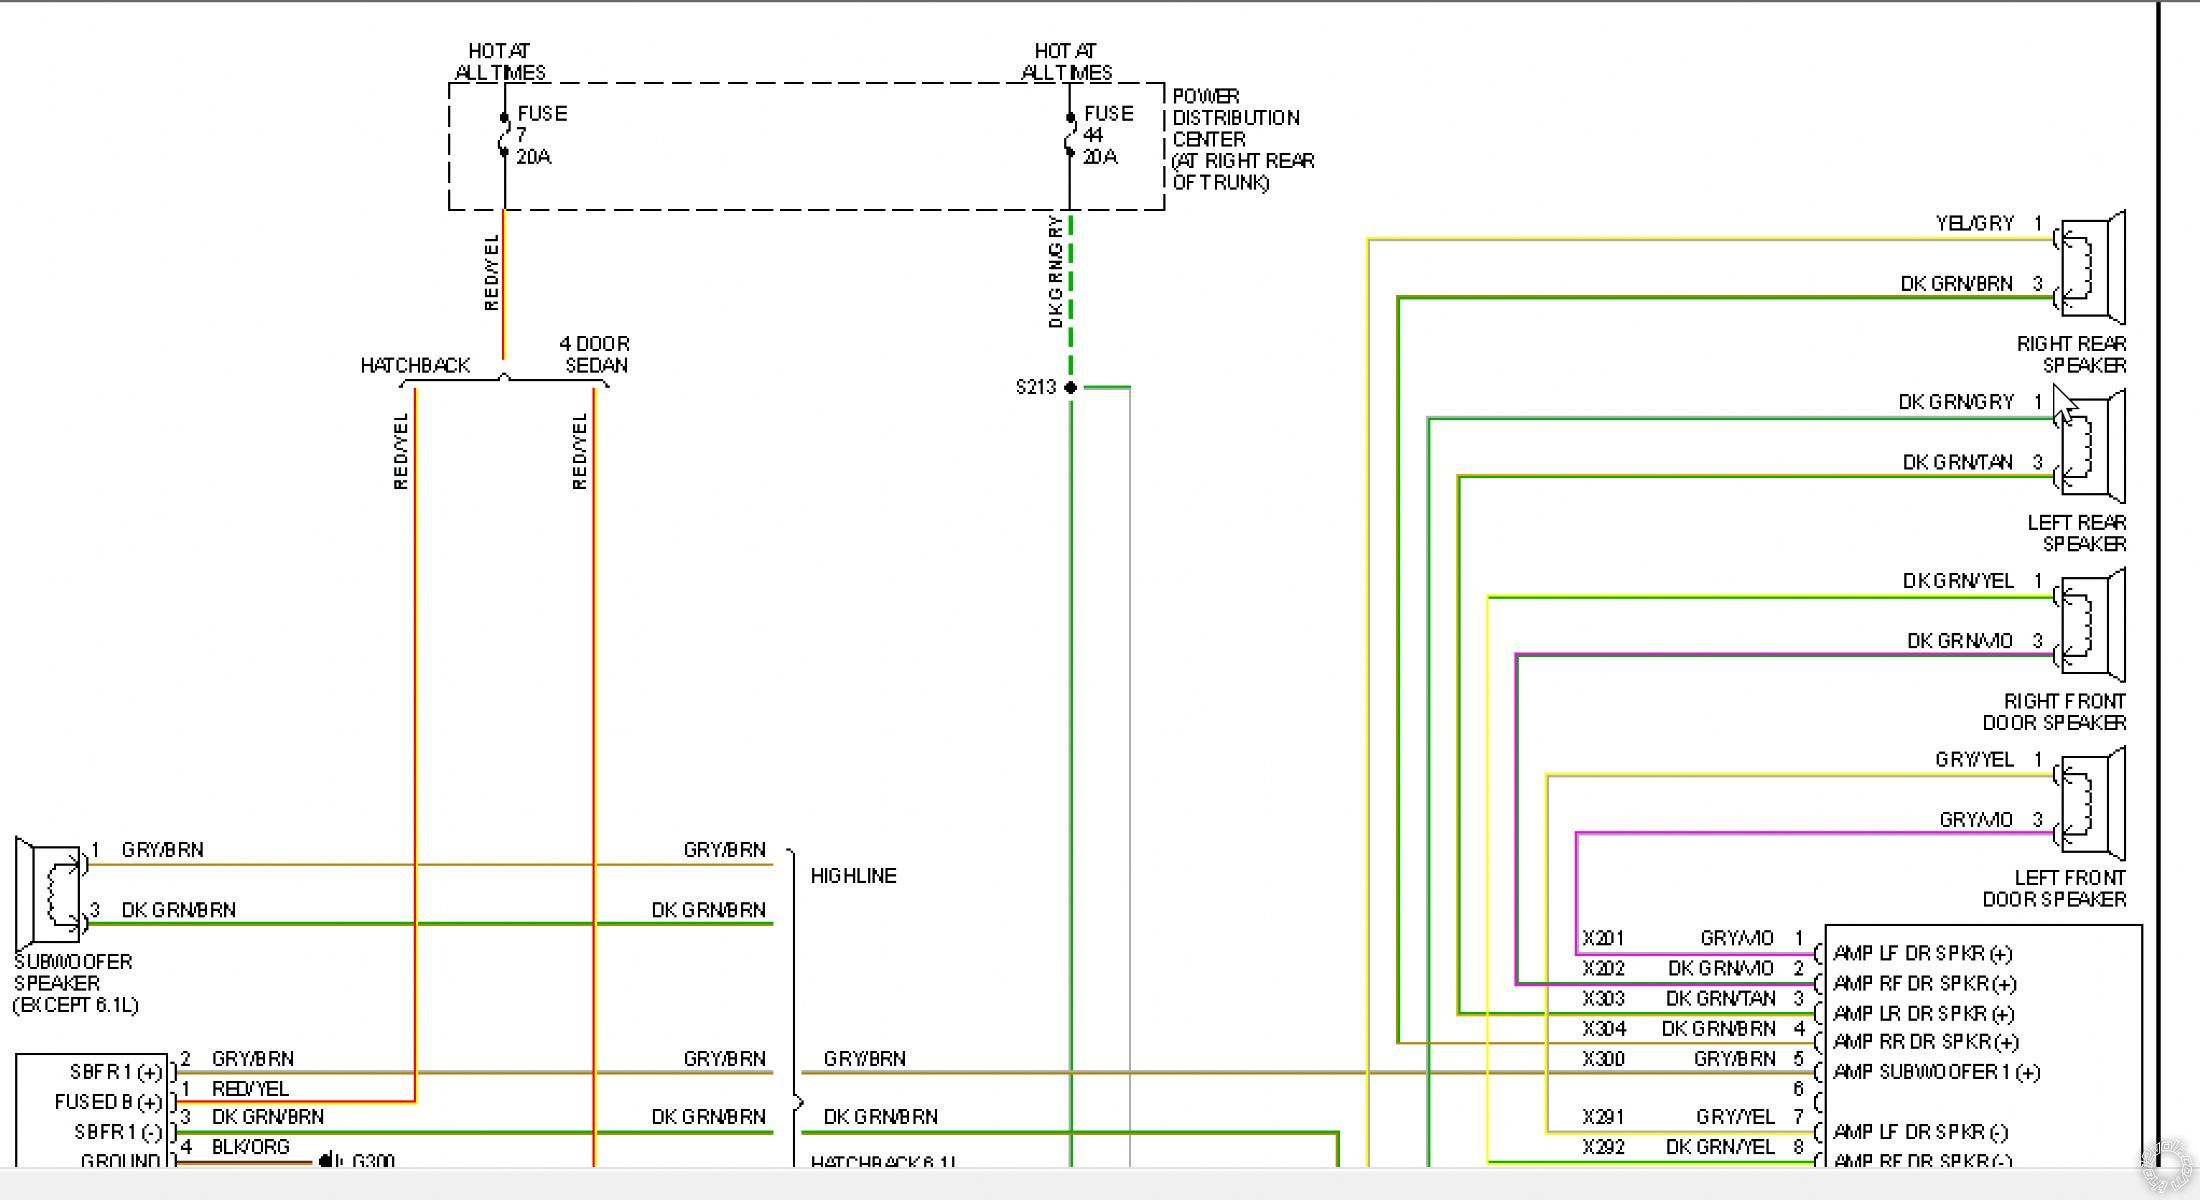 2007 Dodge Caliber Radio Wiring Diagram from www.the12volt.com